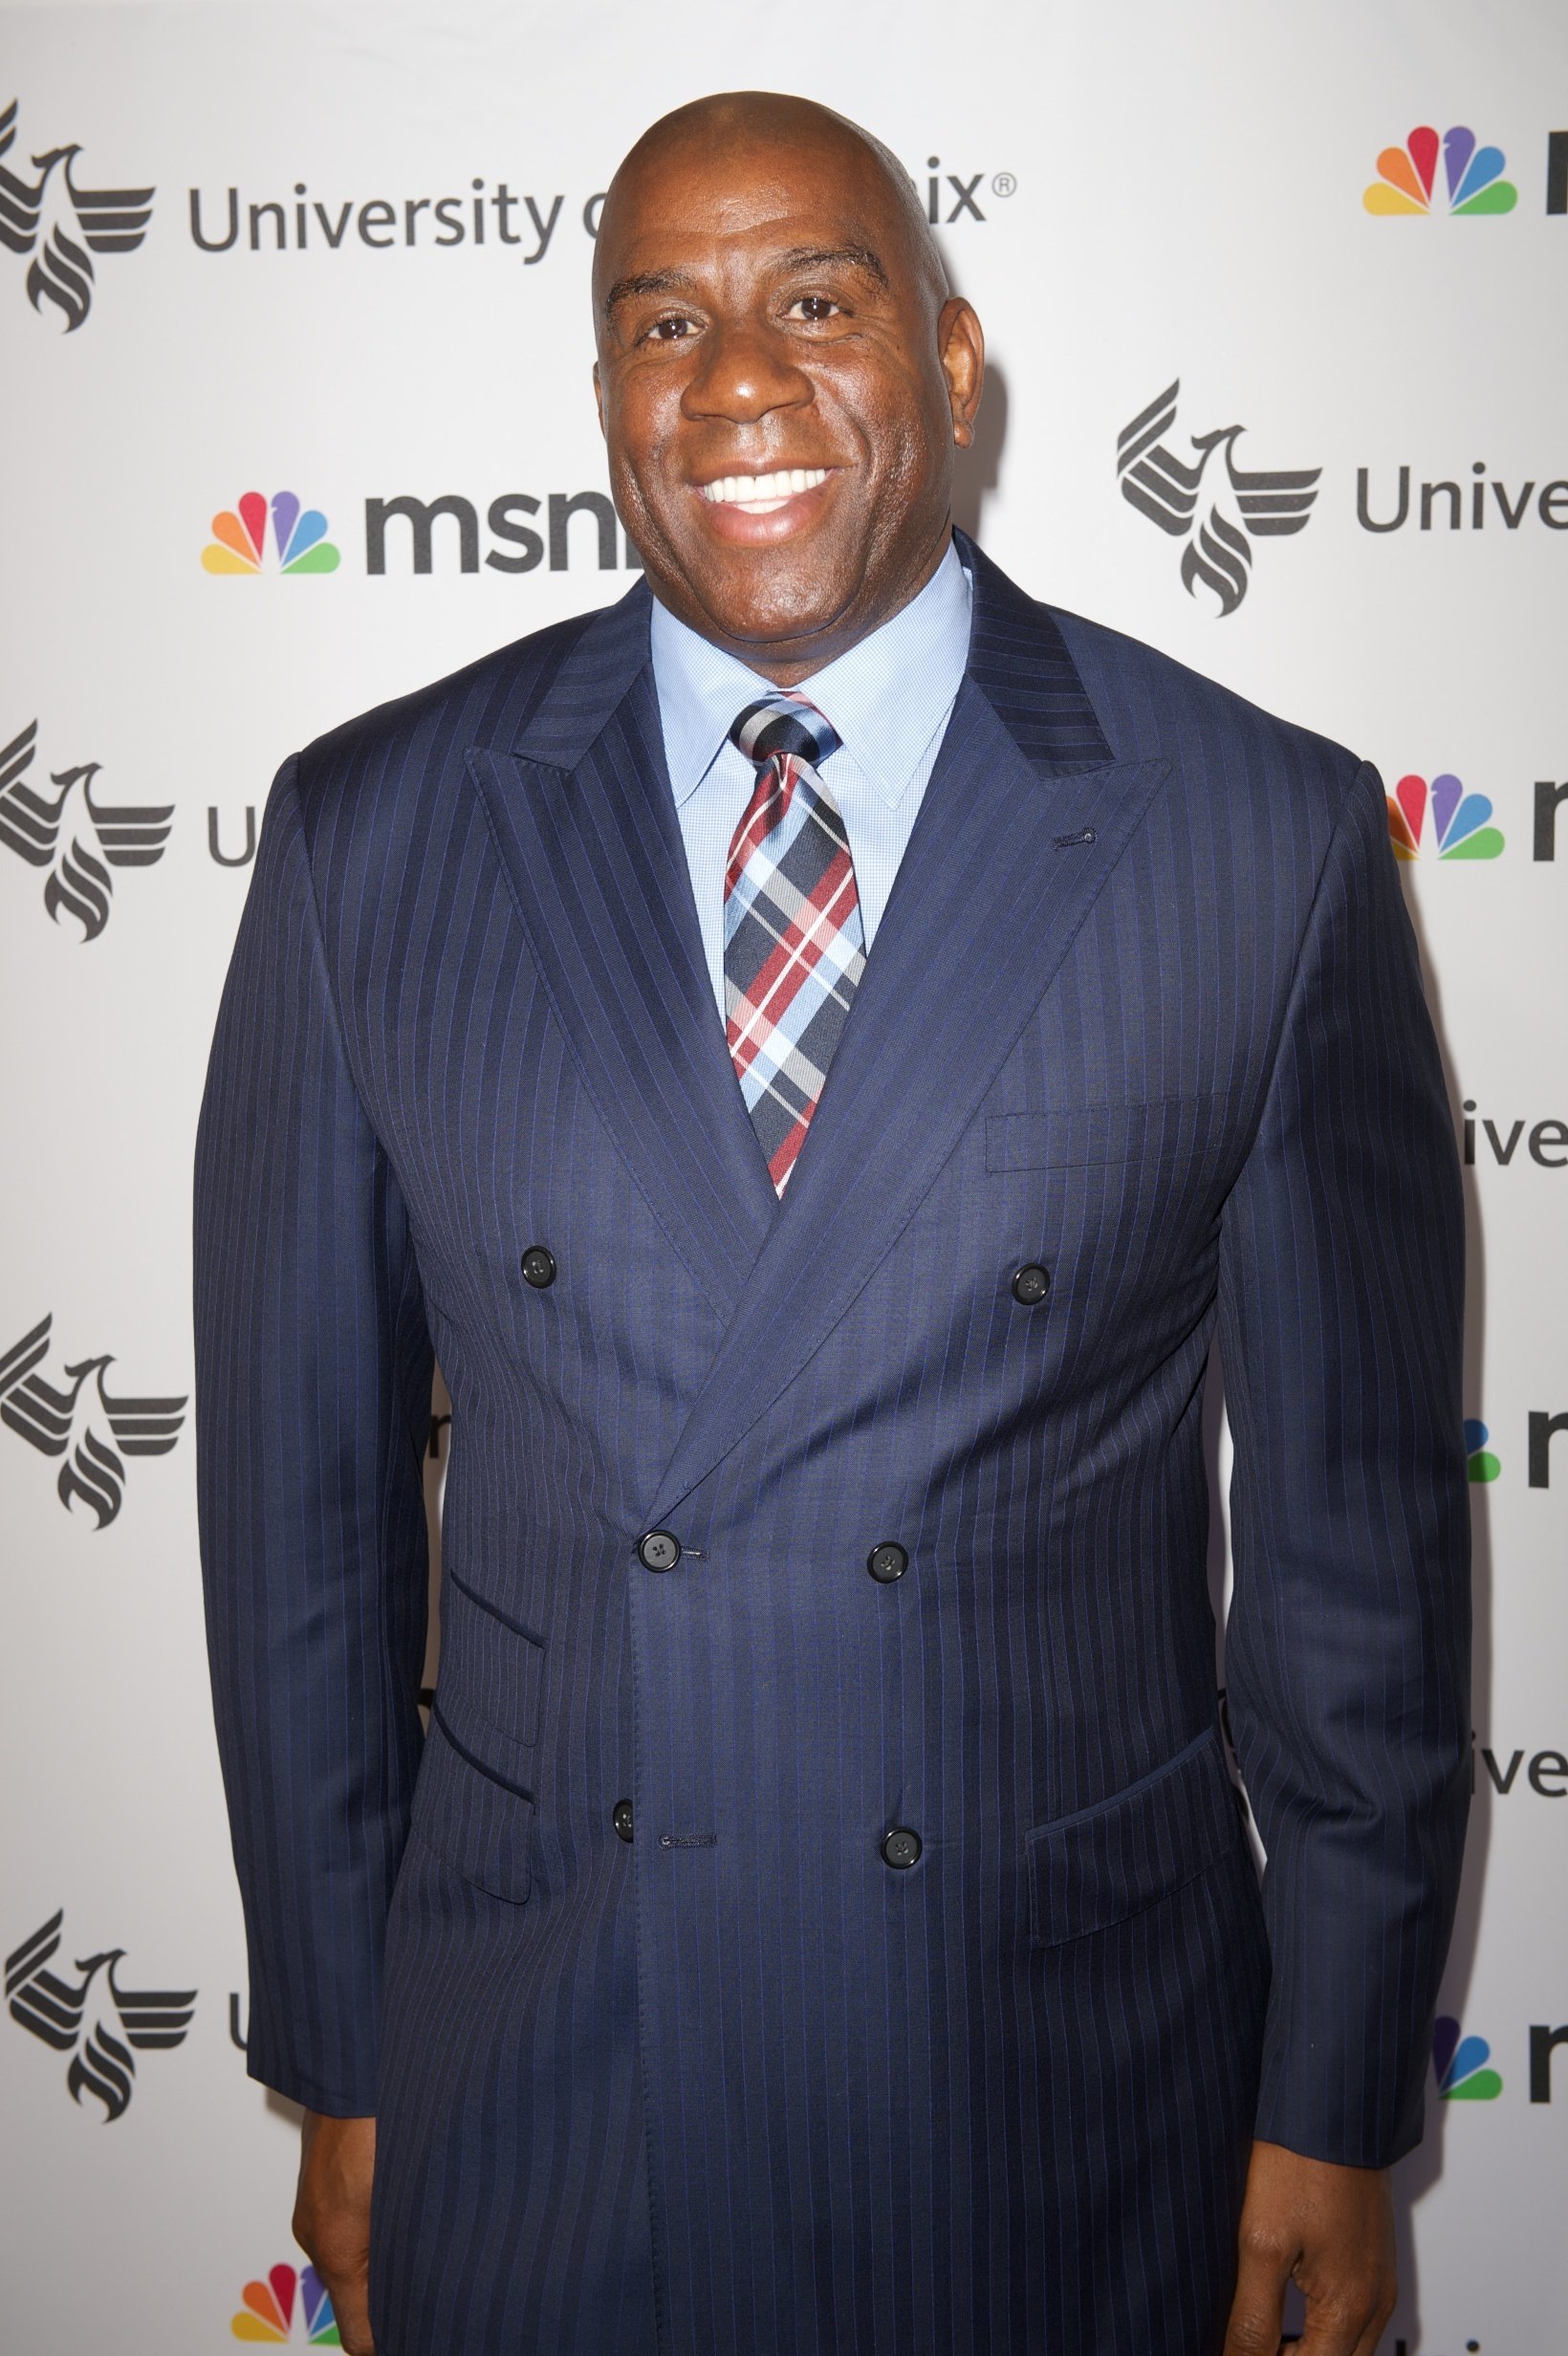 Ervin "Magic" Johnson attends the "Advancing The Dream" Live at The Apollo Theater on September 6, 2013. | Photo: Getty Images